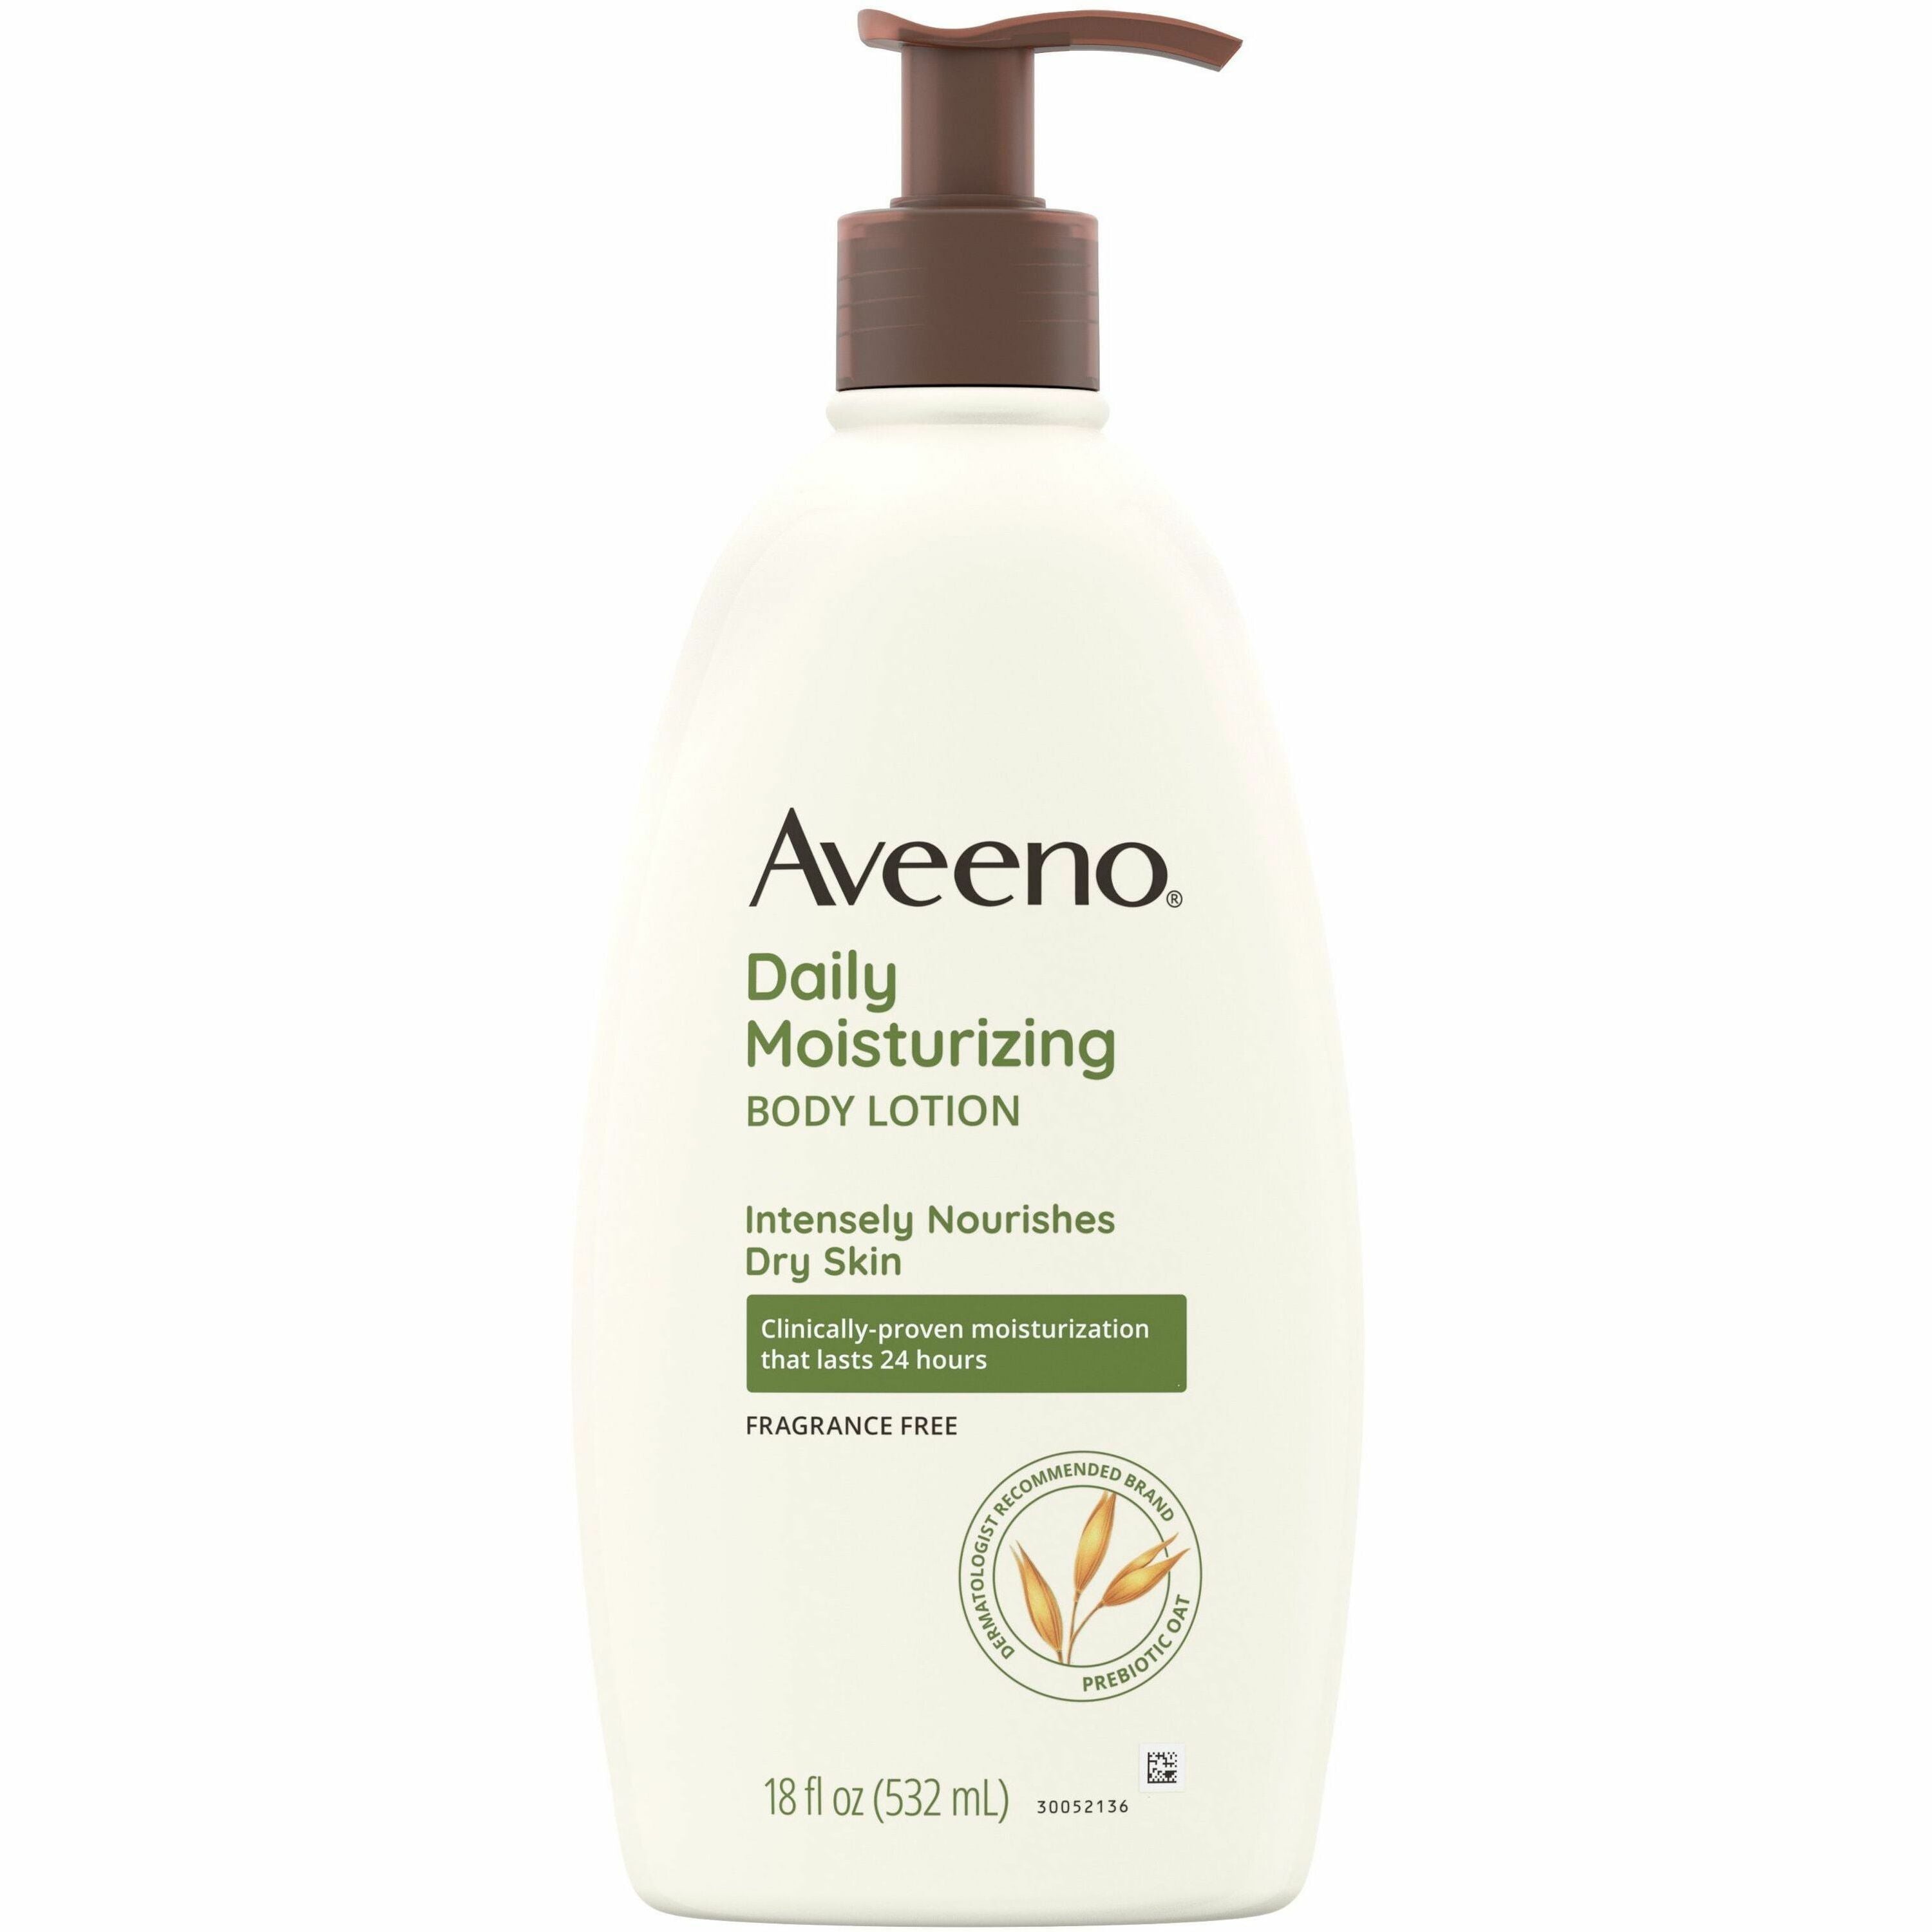 aveeno-daily-moisturizing-body-lotion-lotion-18-fl-oz-for-dry-skin-applicable-on-body-moisturising-fragrance-free-non-greasy-non-comedogenic-soothing-oat-rich-emollients-nourishes-dry-skin-gentle-1-each_joj003844 - 1